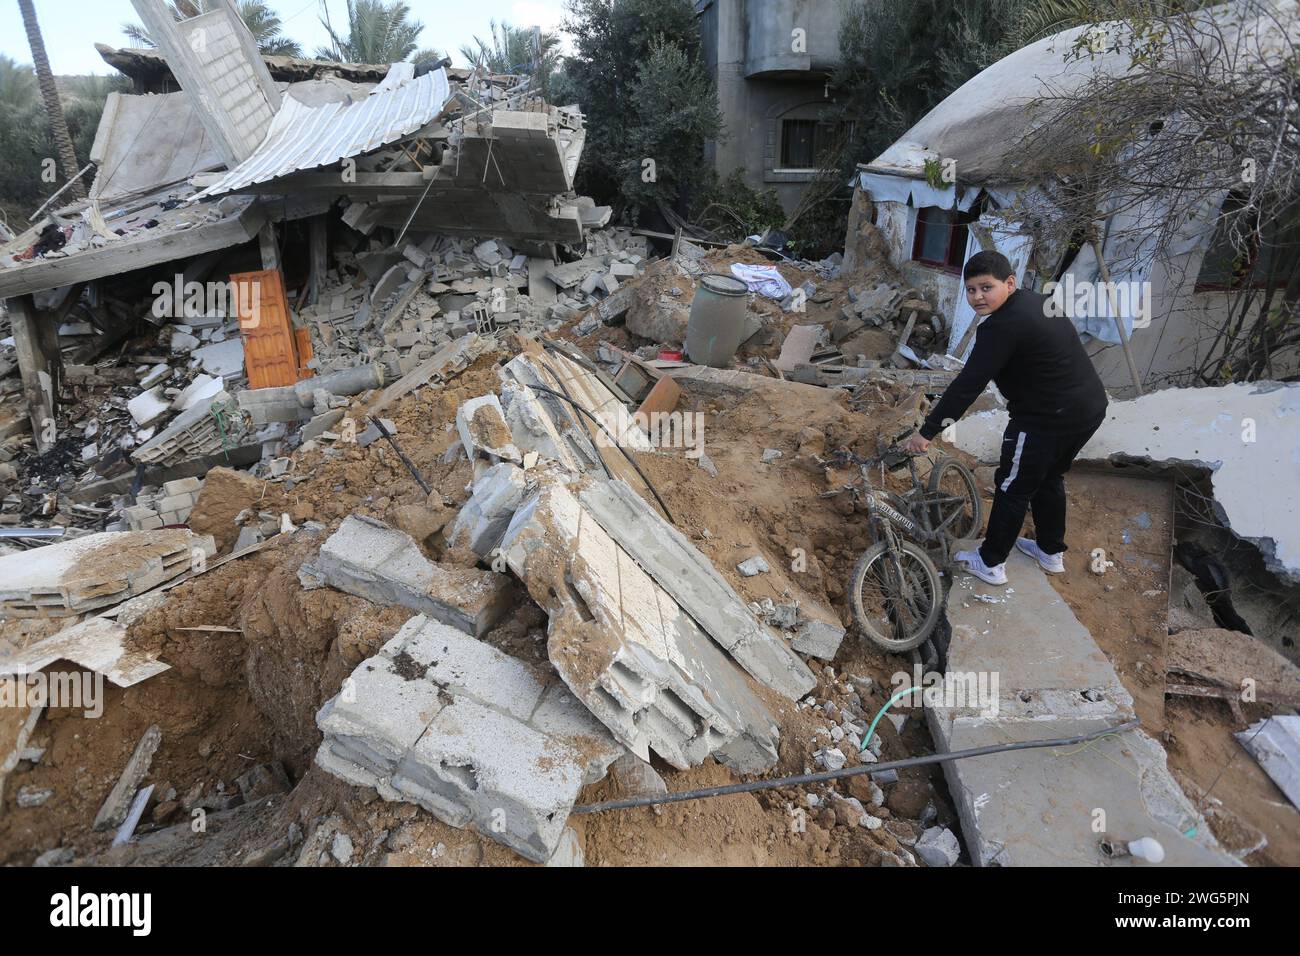 Palestinians inspect the damage in the buildings, after an overnight Israeli strike in Dair El-Balah Palestinians inspect the damage in the buildings, after an overnight Israeli strike in Dair El-Balah on February 03, 2024. Photo by Omar Ashtawy apaimages Dair El-Balah Gaza Strip Palestinian Territory 030224 Dair EL-Balah OSH 004 Copyright: xapaimagesxOmarxAshtawyxxapaimagesx Stock Photo